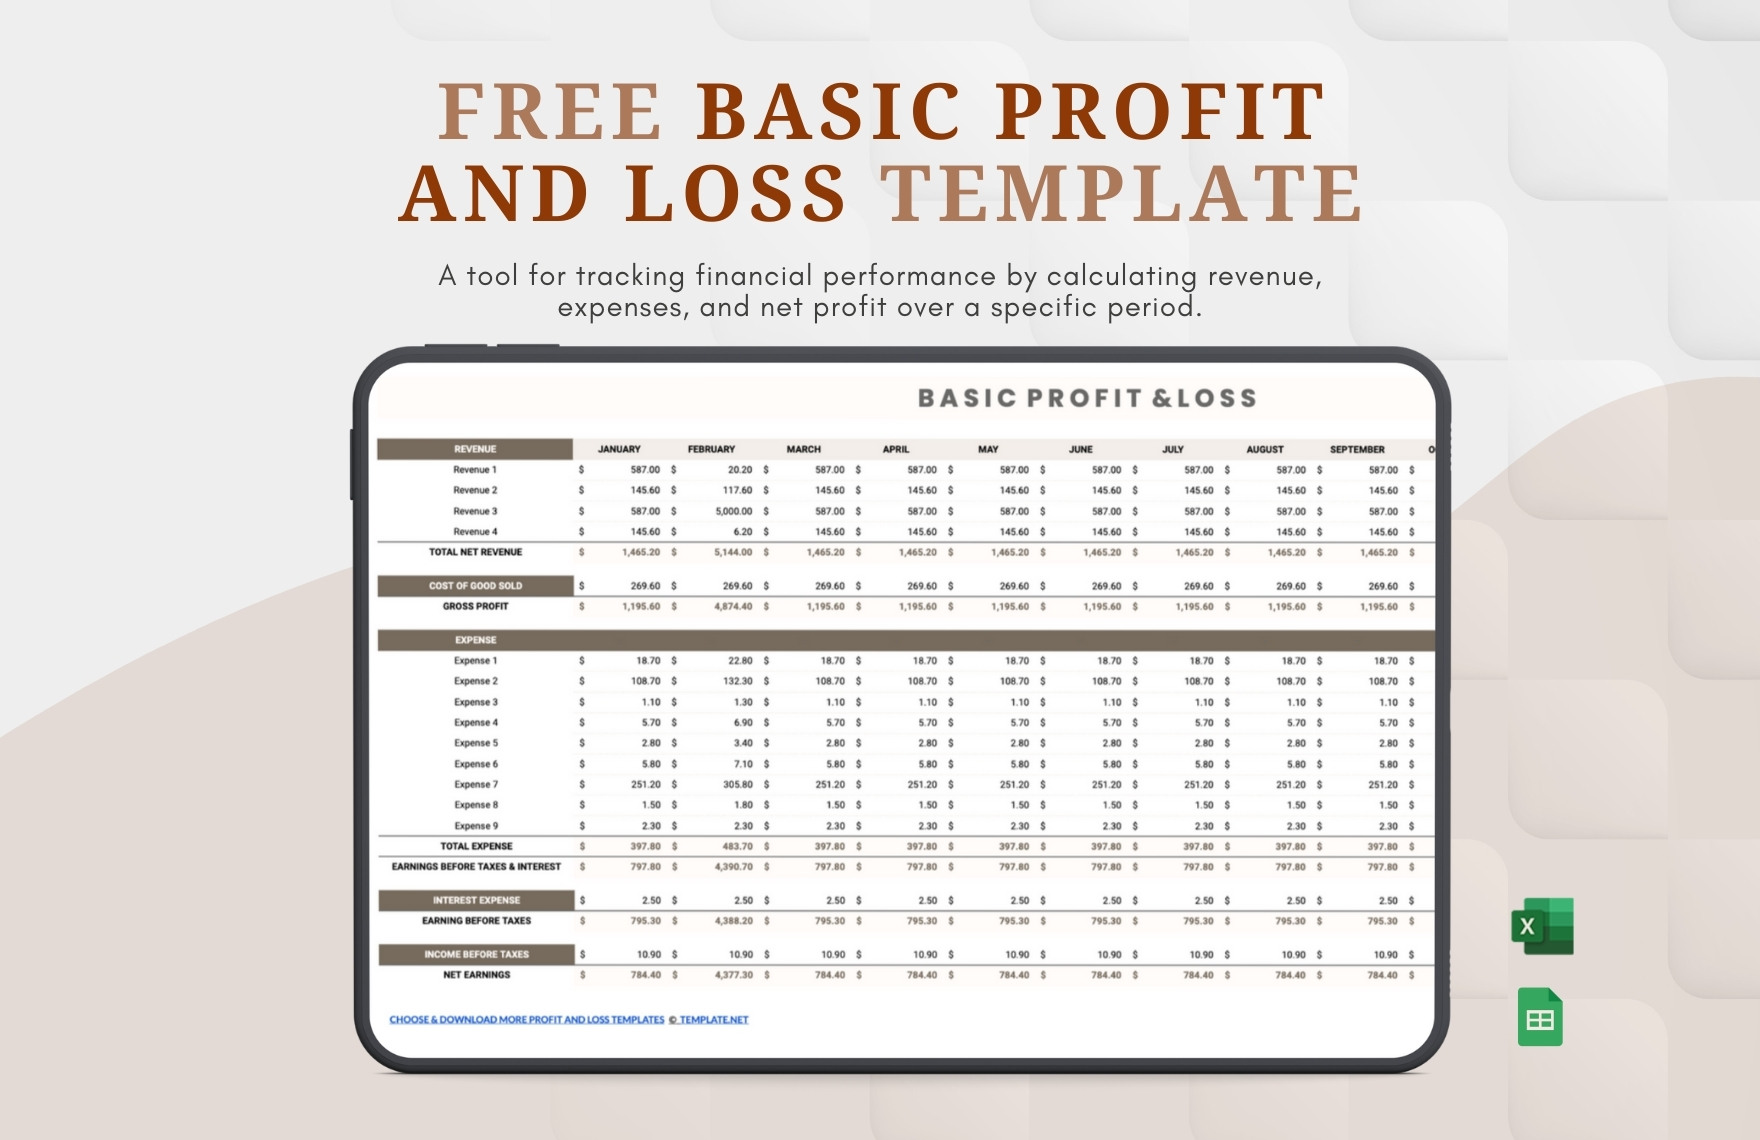 Basic Profit and Loss Template